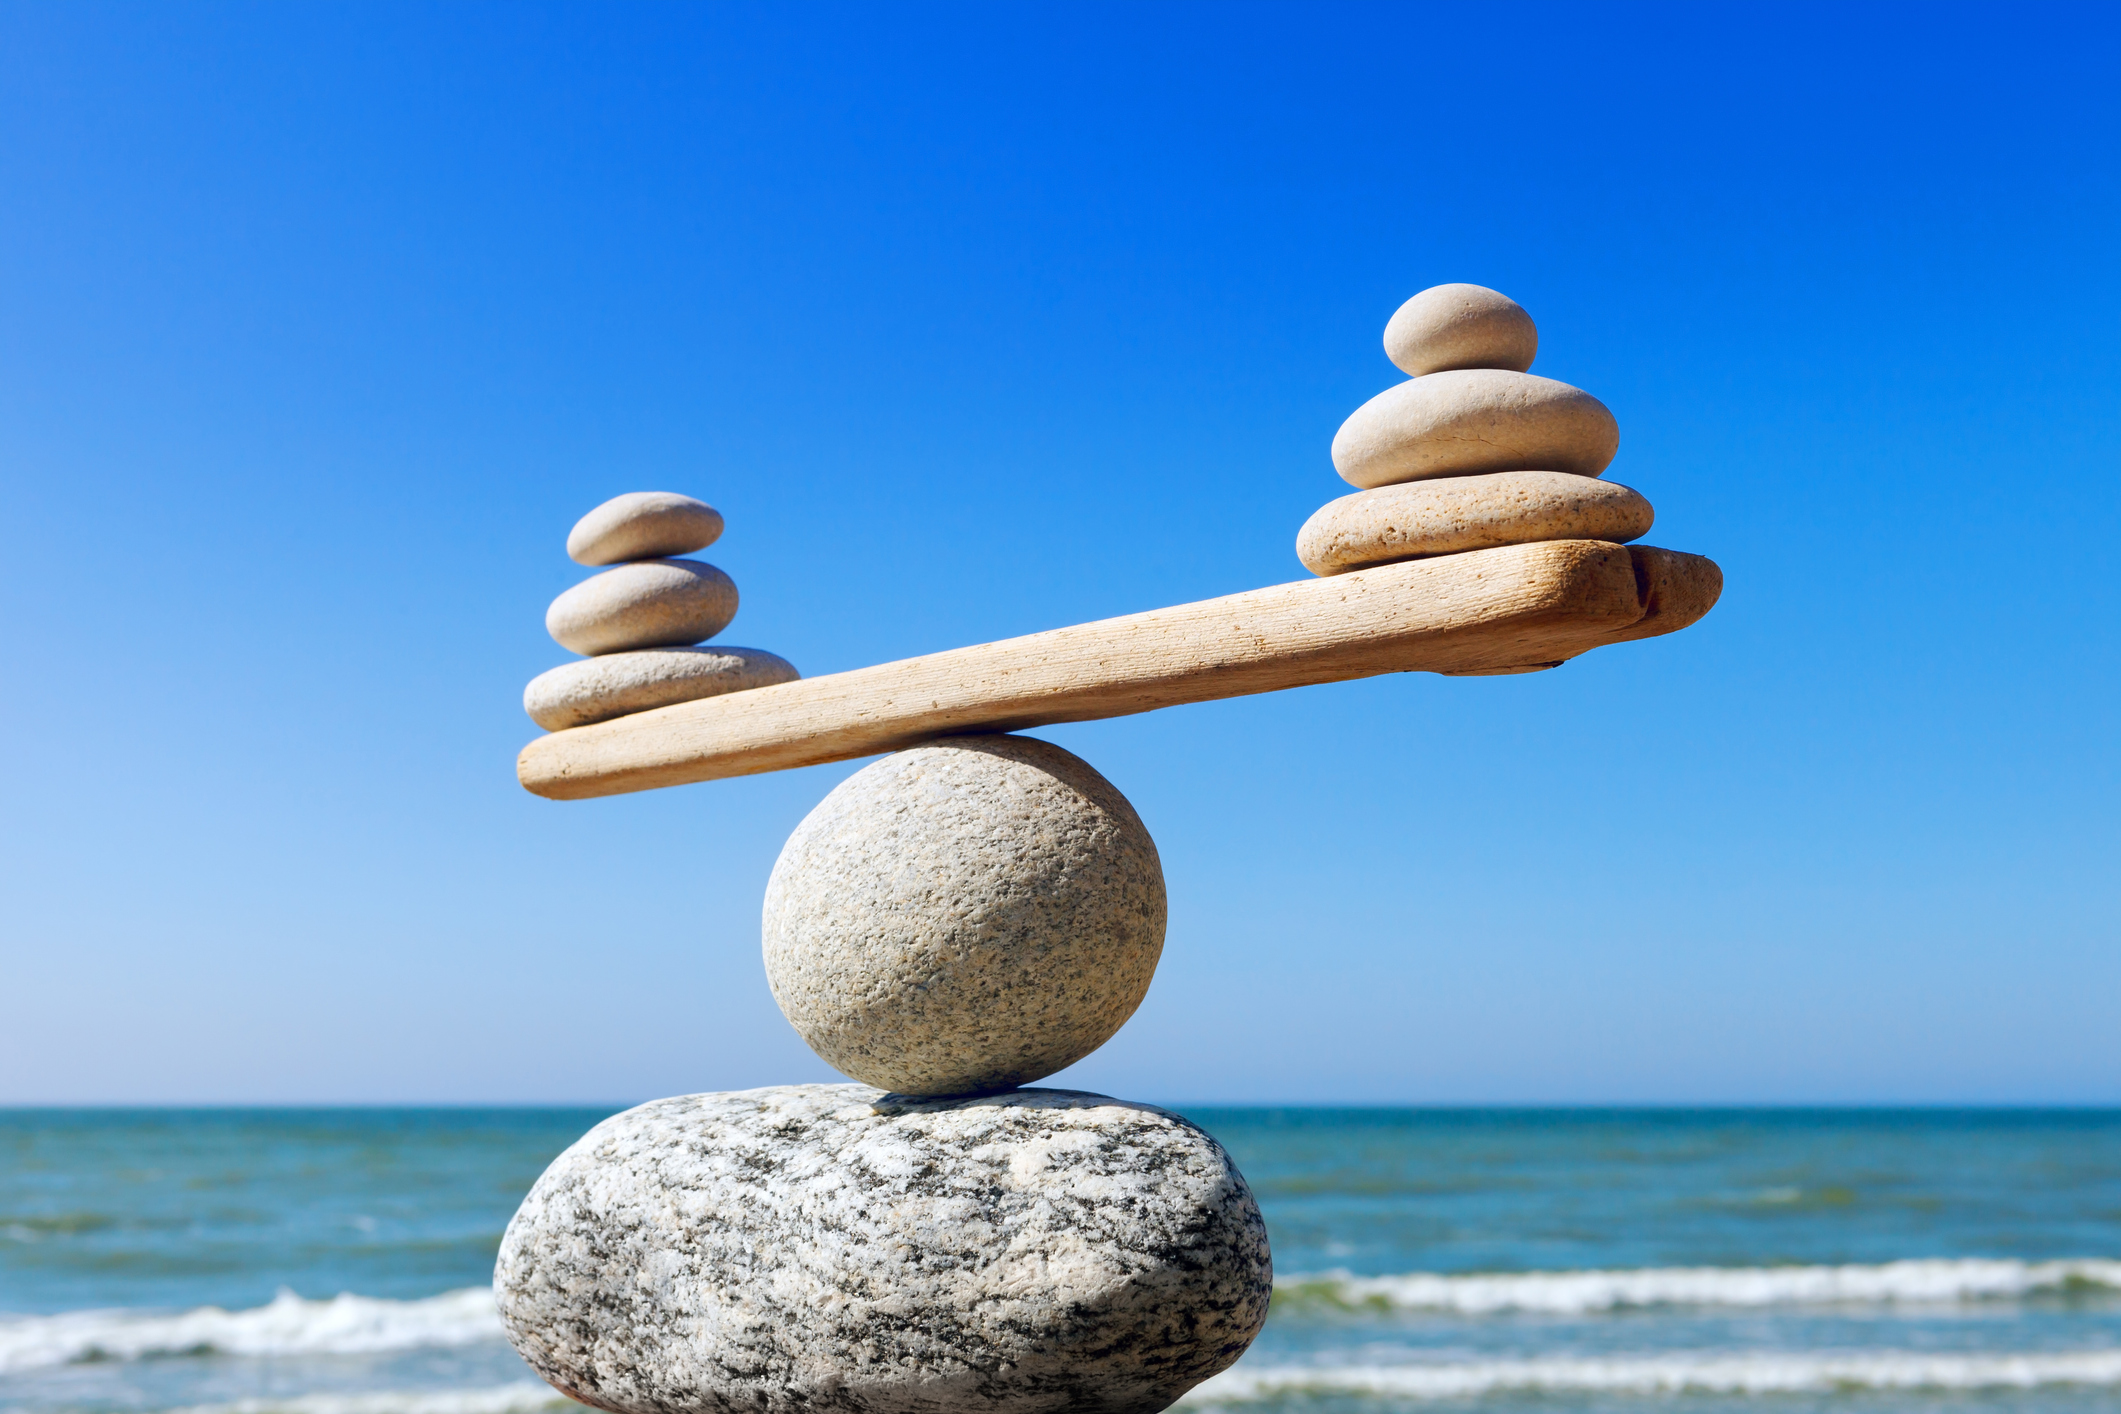 rocks-balancing-on-one-another